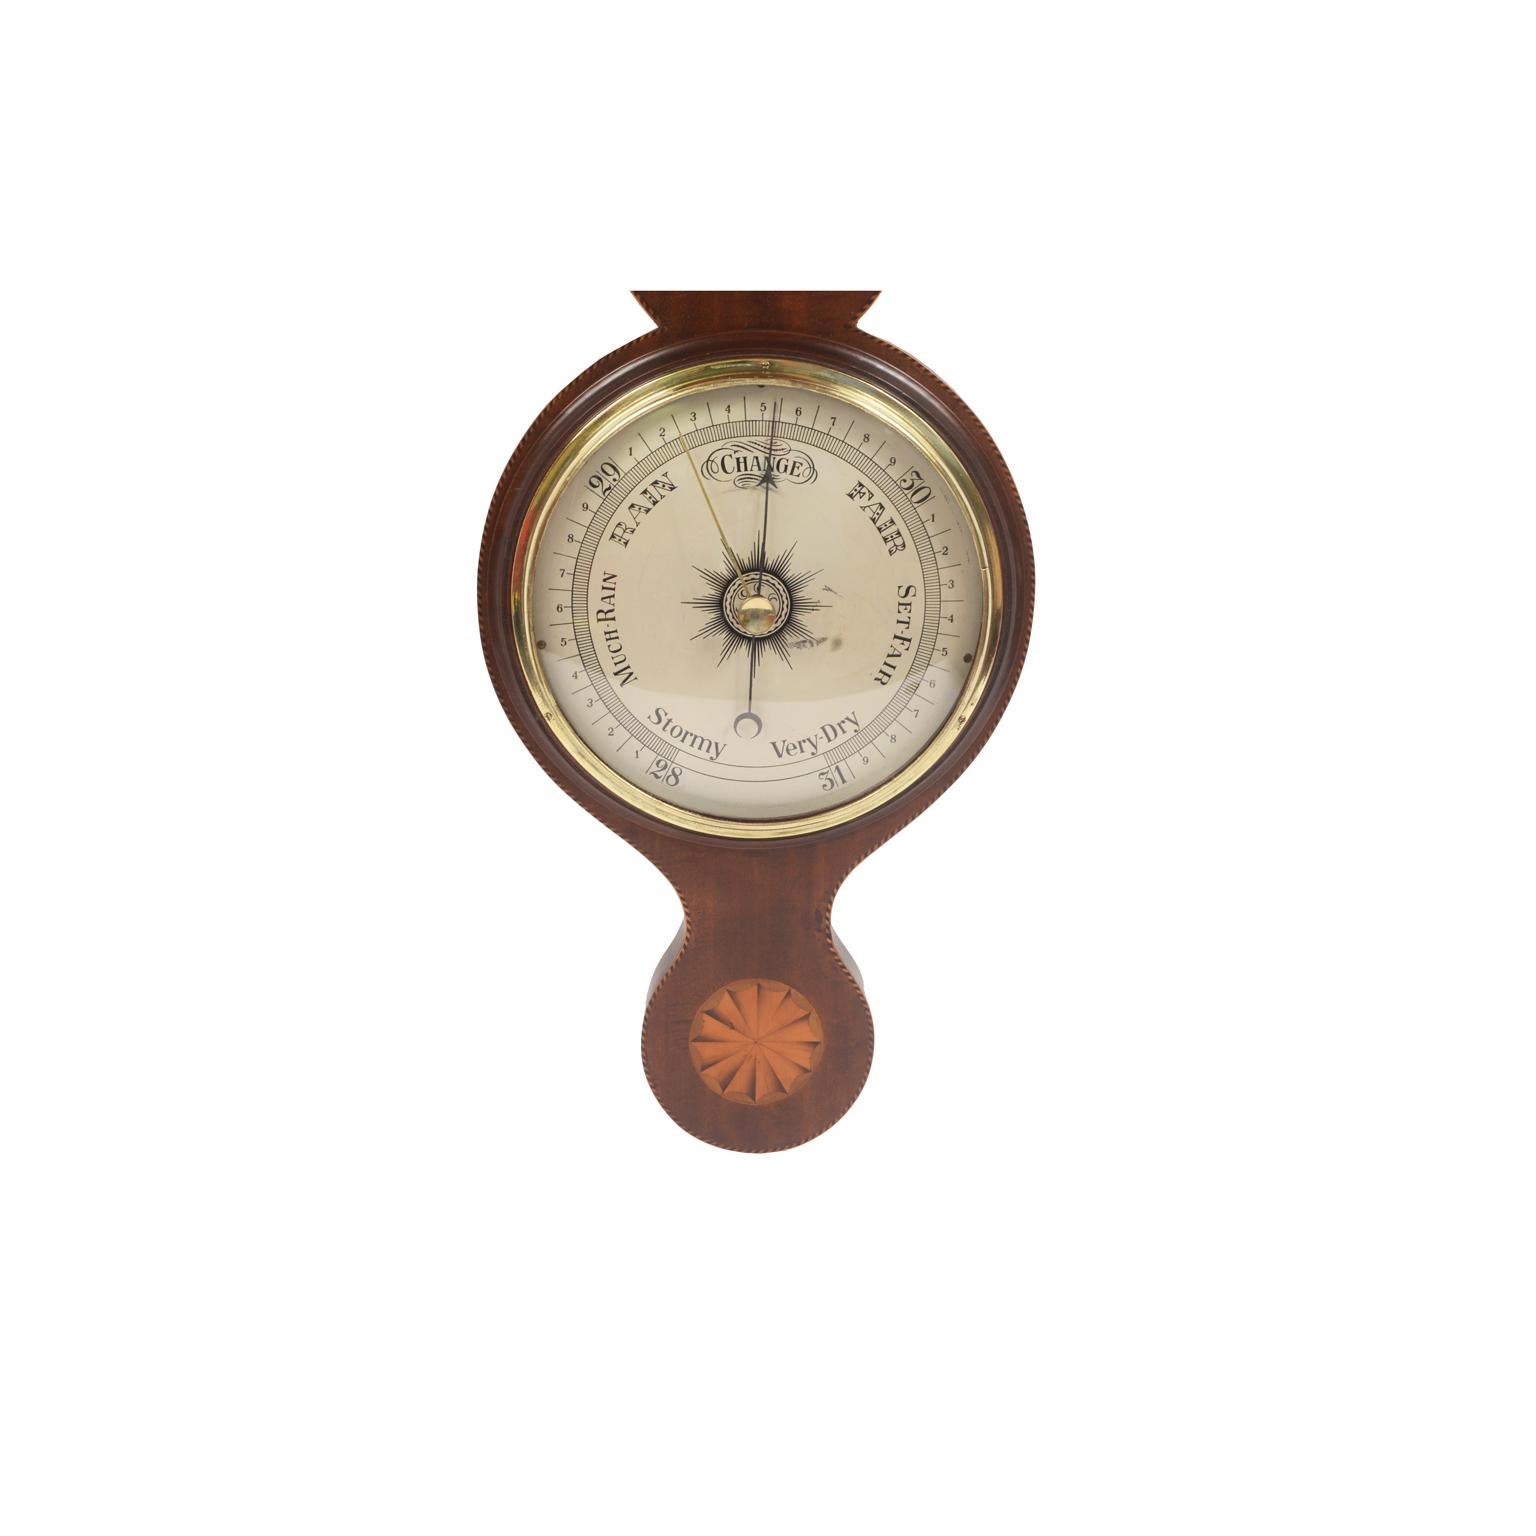 Aneroid barometer of mahogany with threads and decorative motifs. Silver-plated brass dial engraved with meteorological indications and double hand, the first one directly connected to the barometric box indicates the atmospheric pressure trend, the